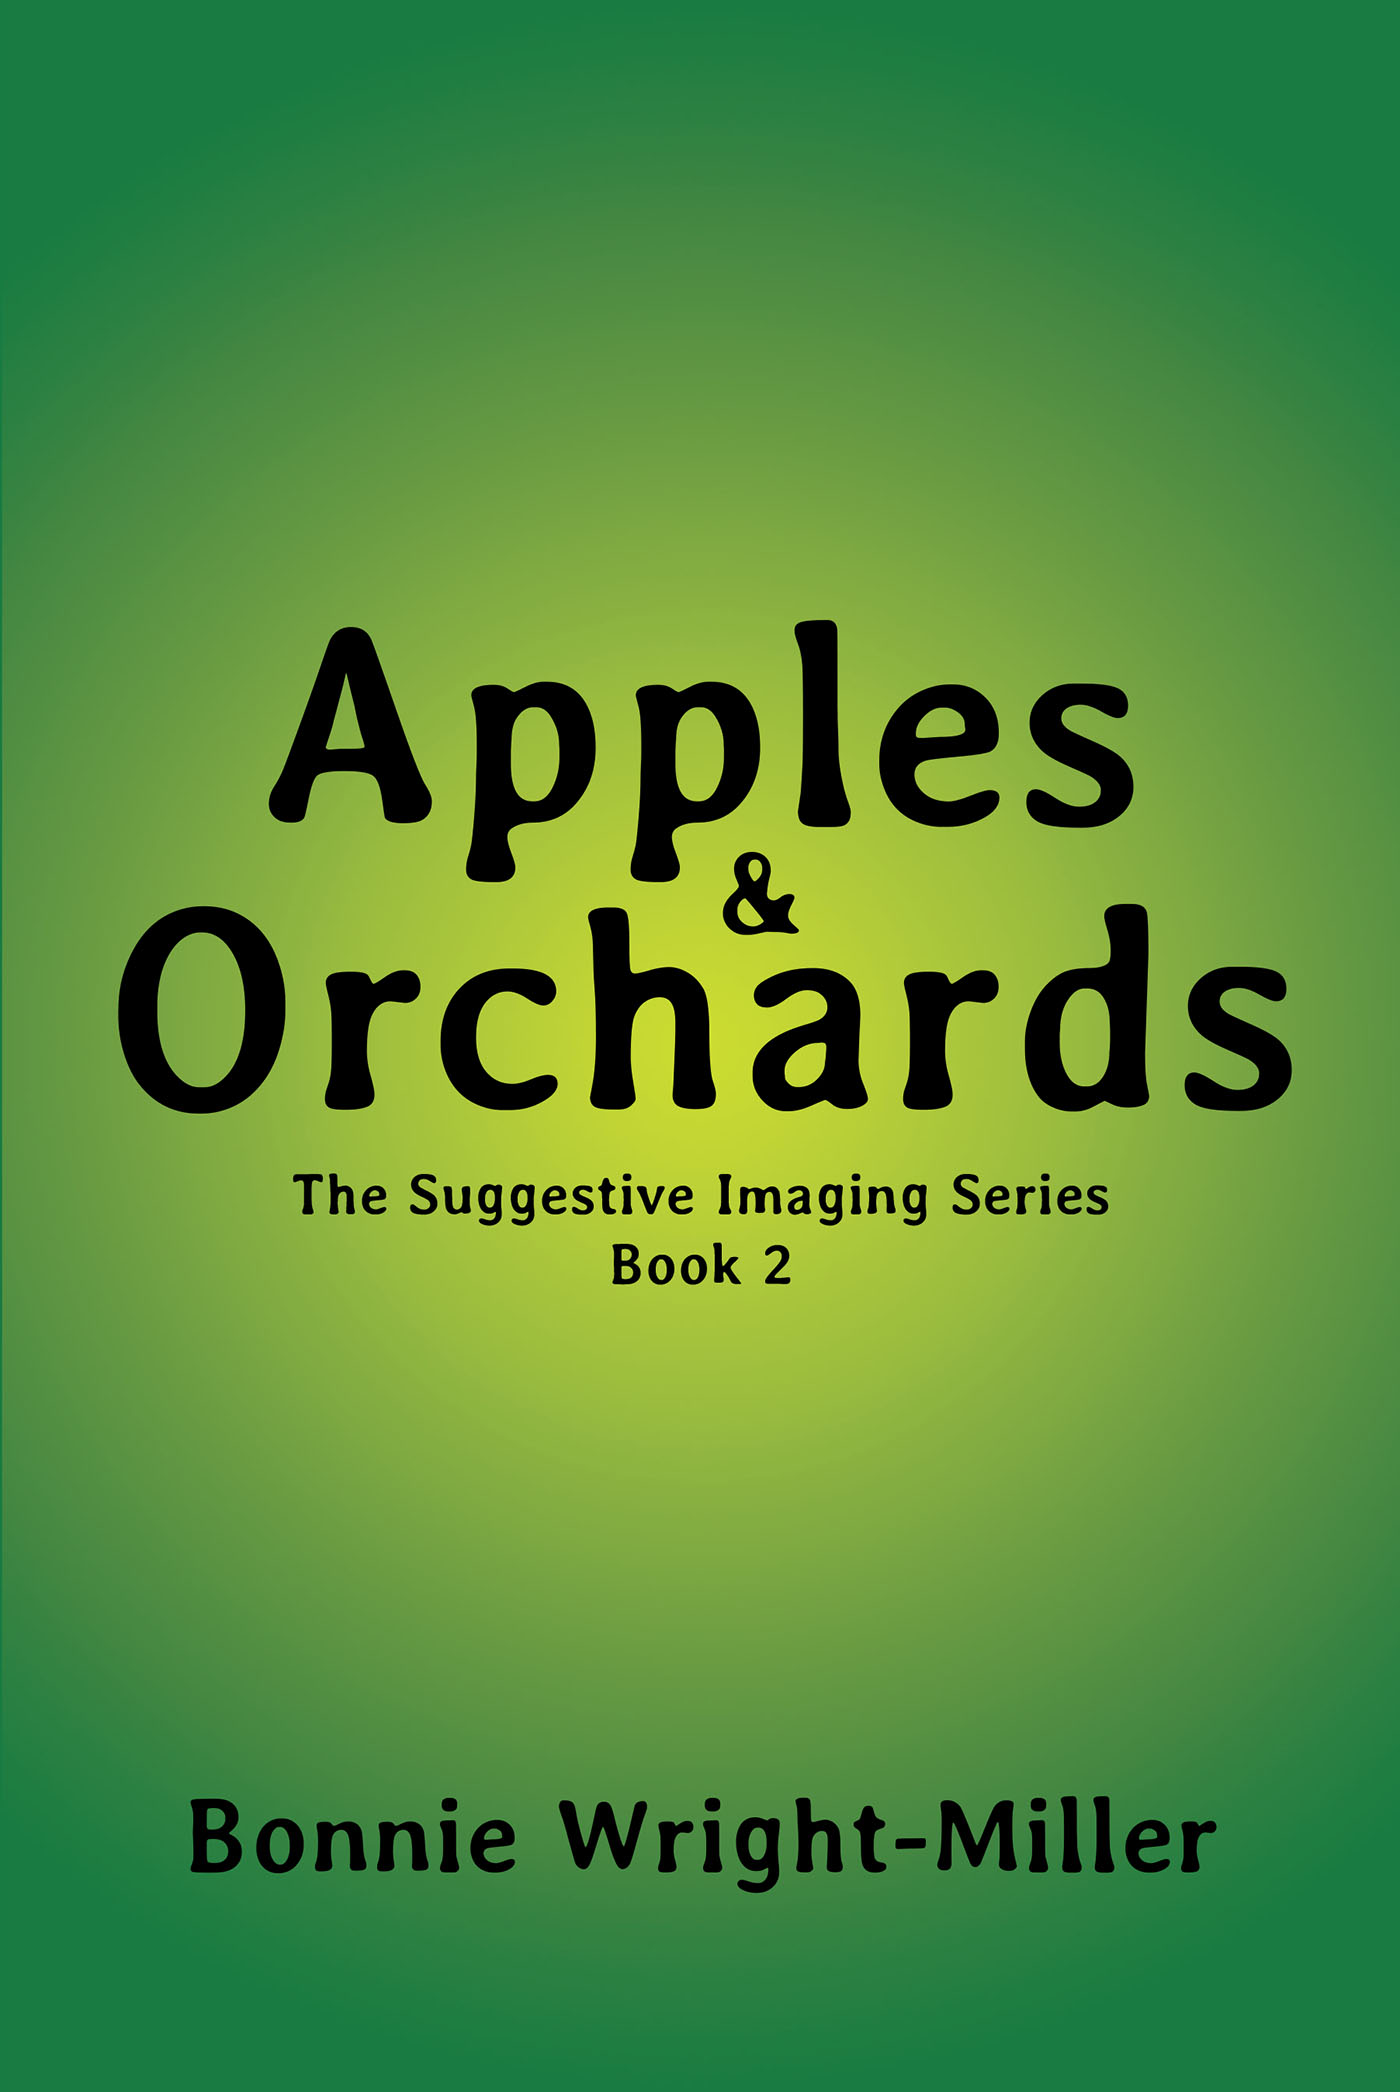 Apples & Orchards Cover Image